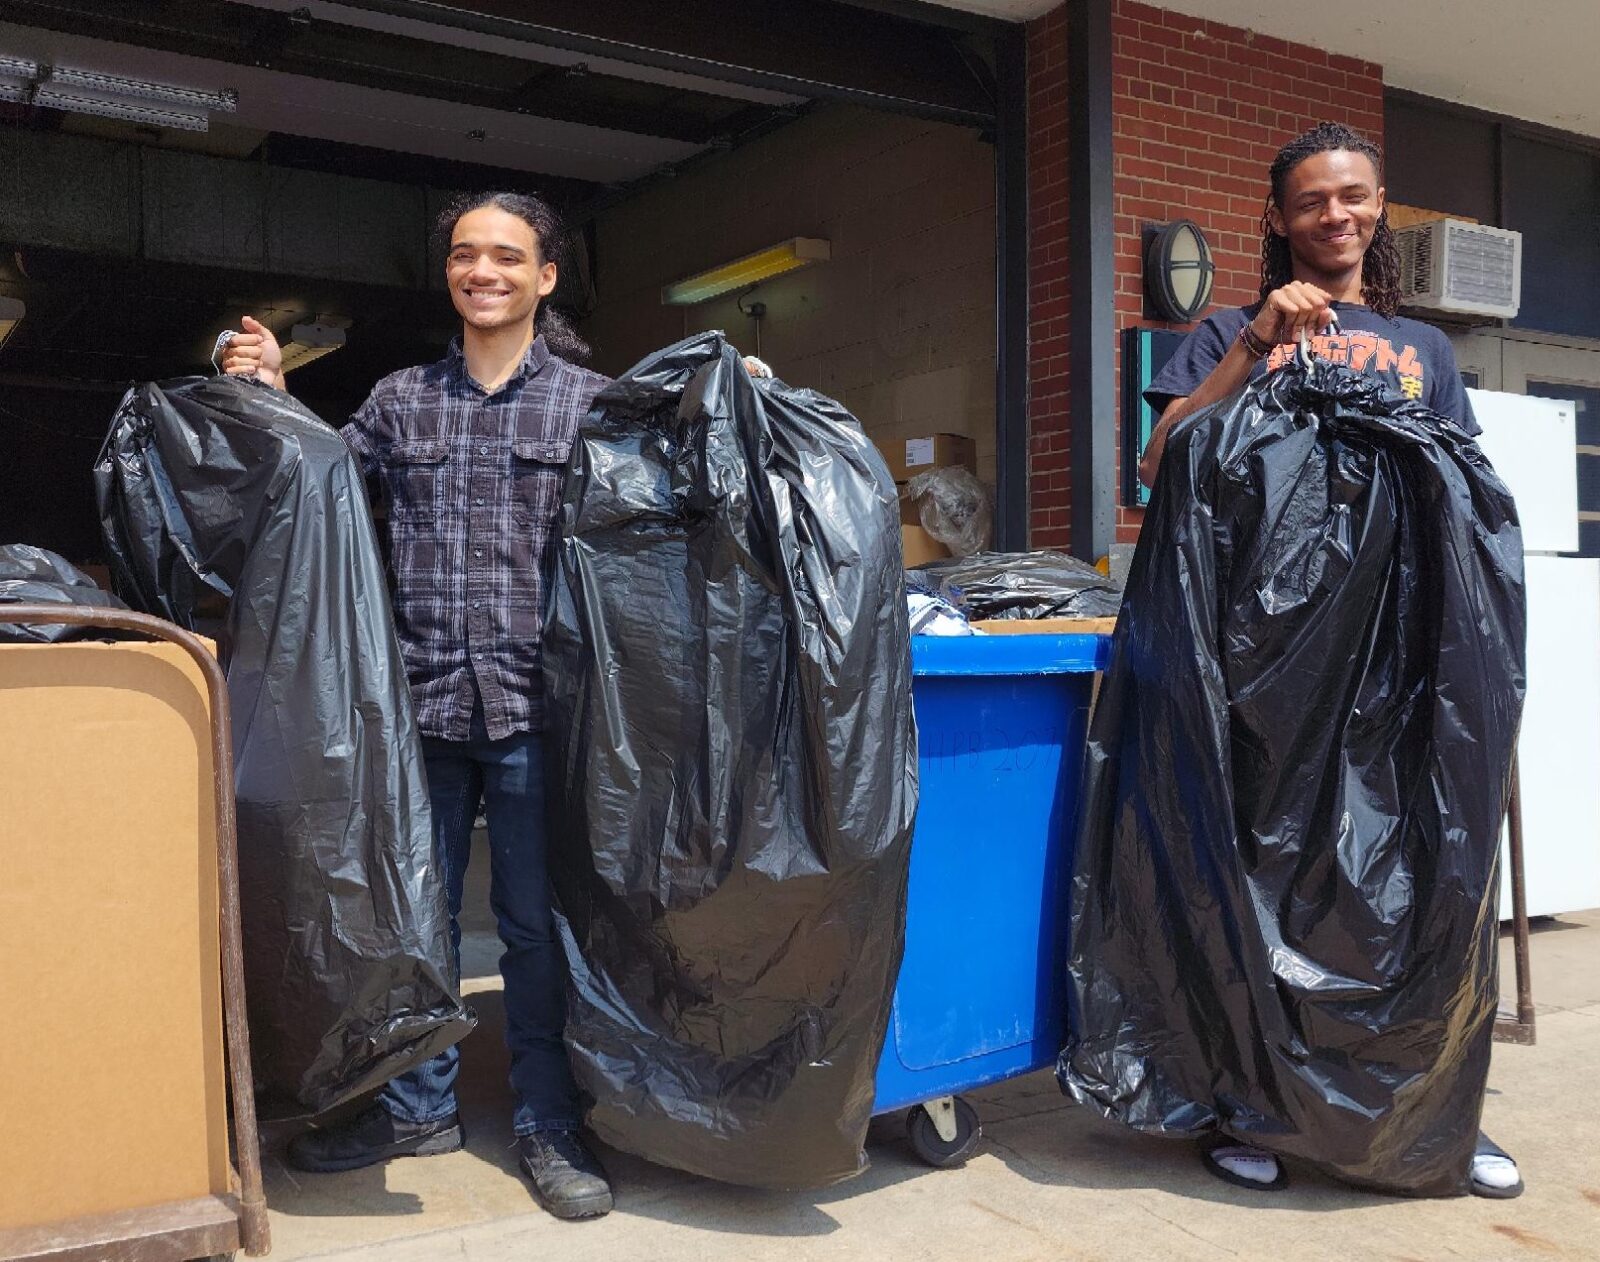 Students Tristan and Jamal moved donated items into the Career Closet